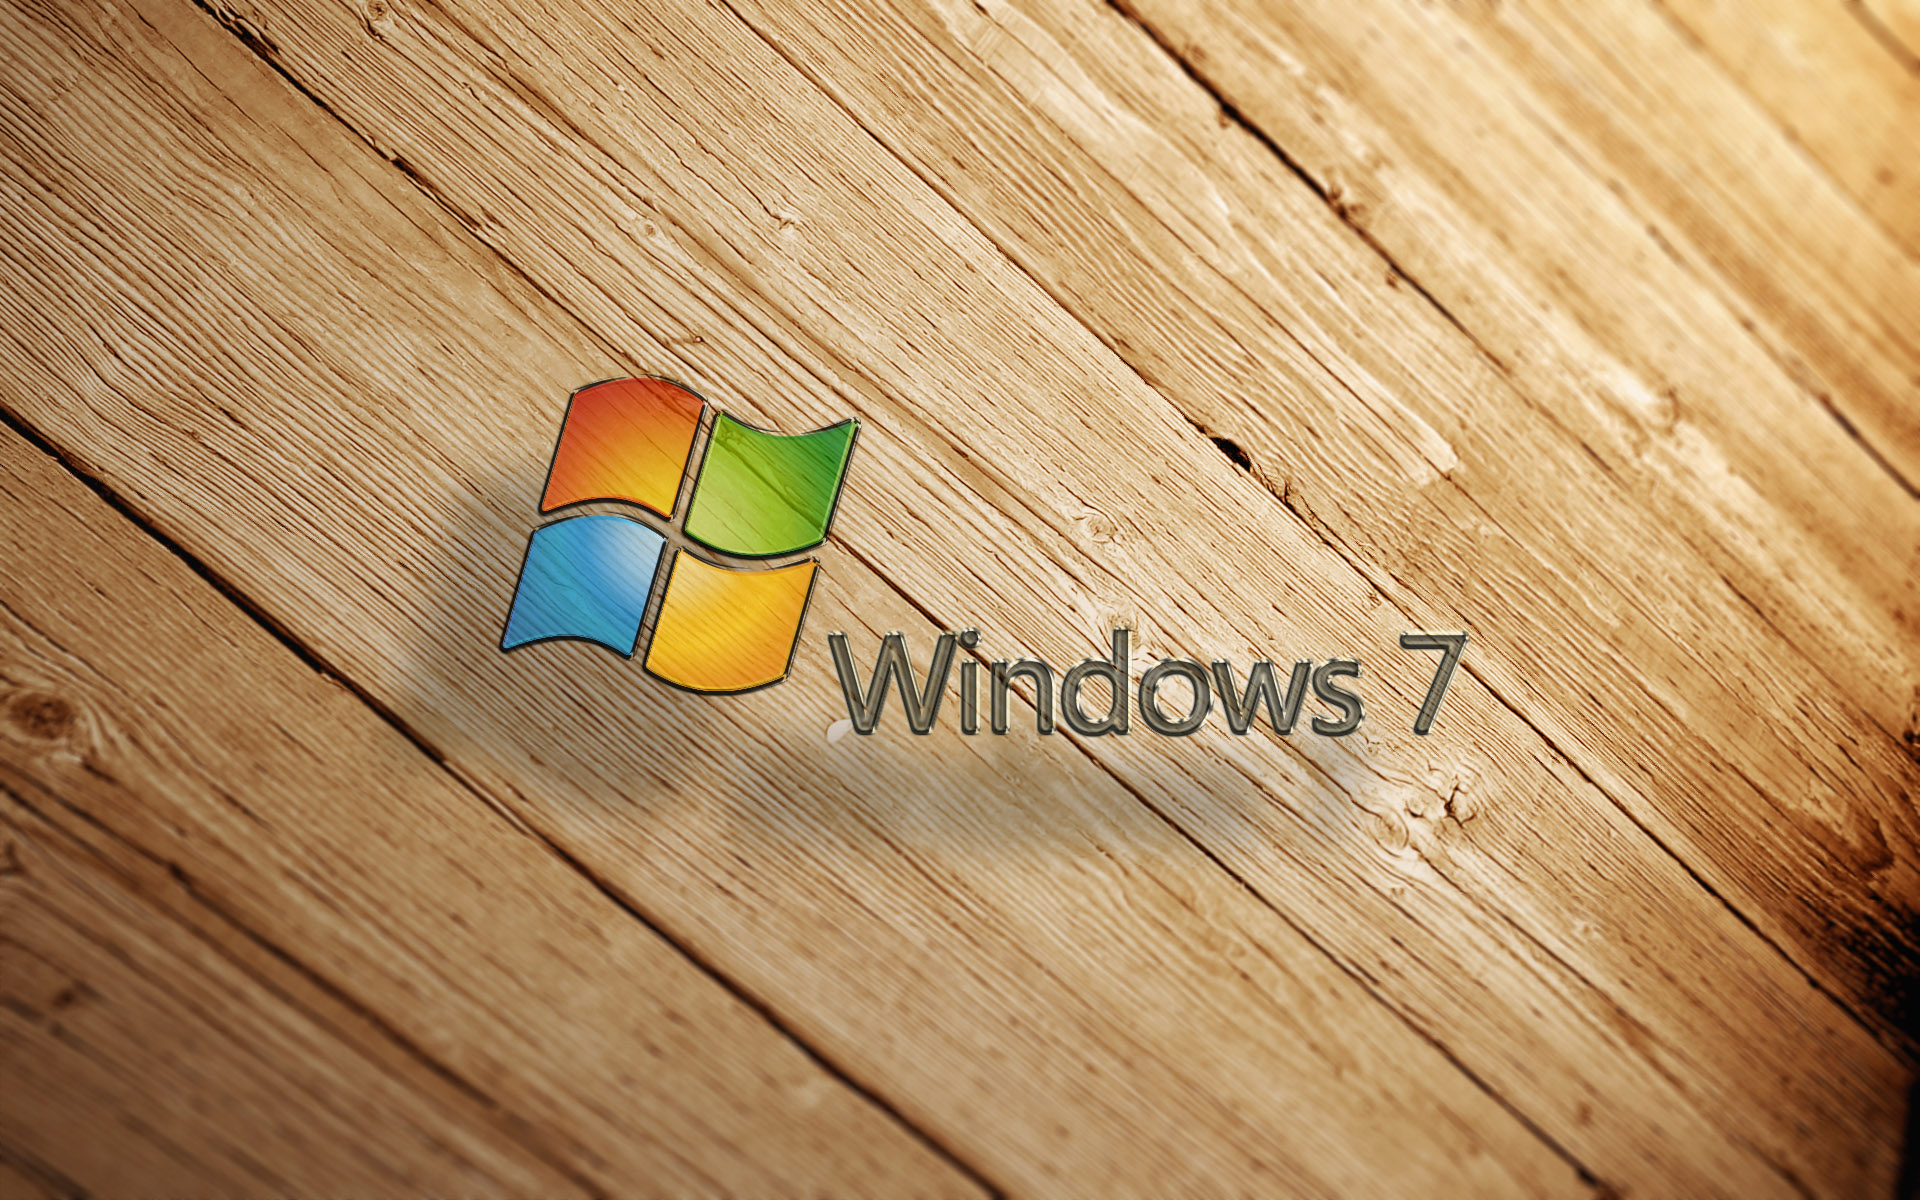 Here are 10 sweet Windows 7 wallpapers!